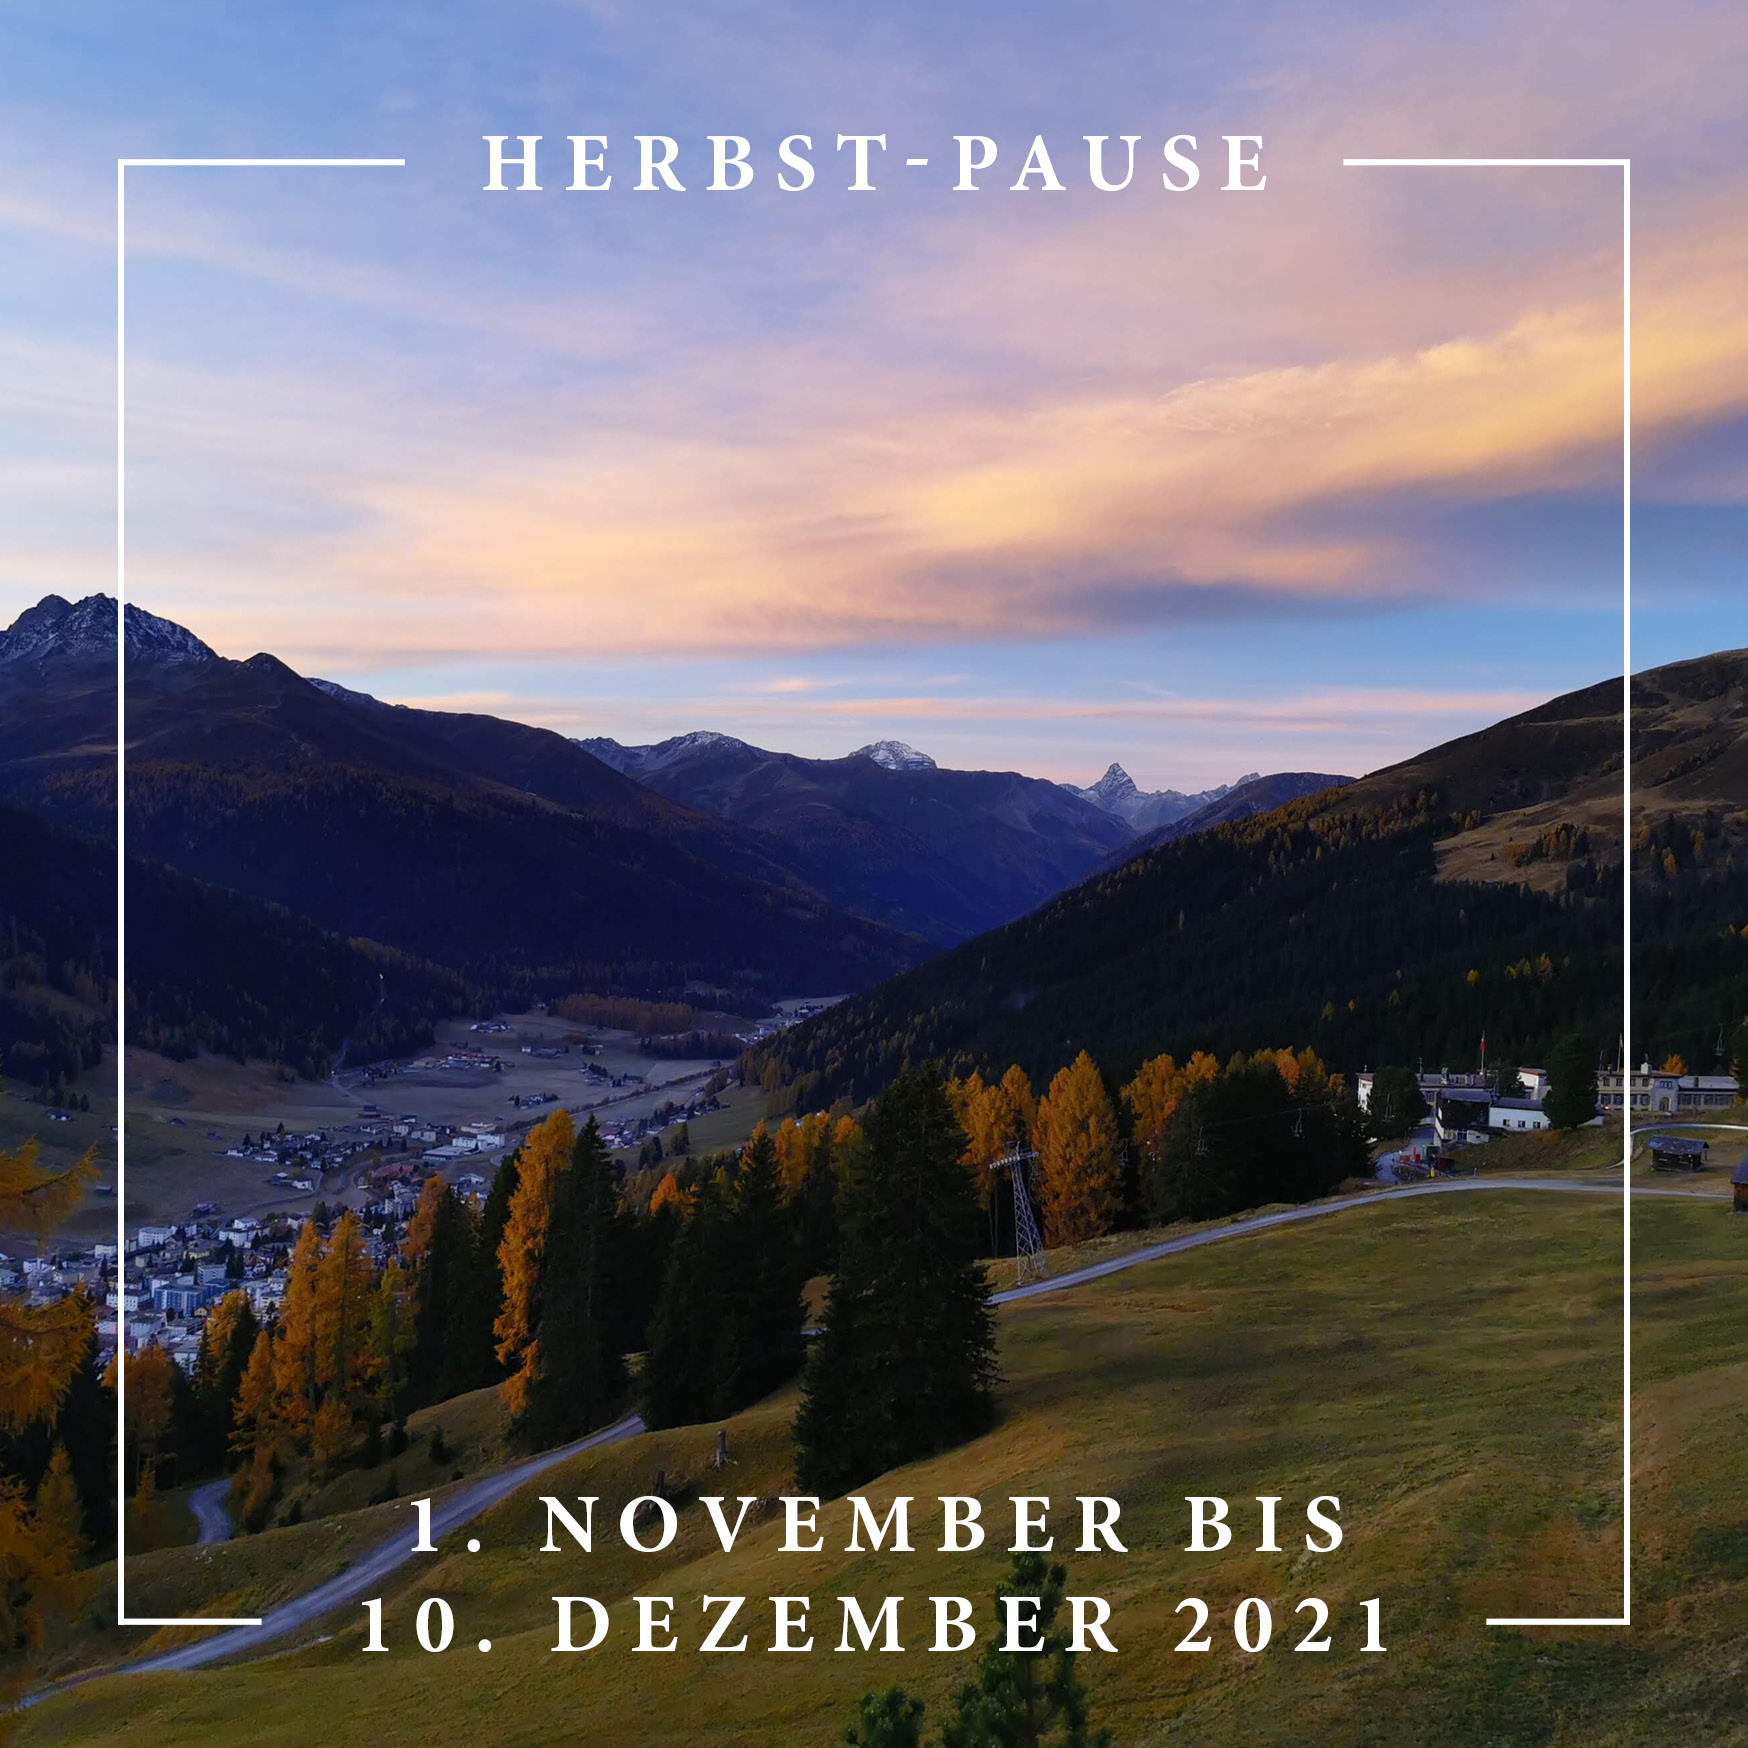 Herbst-Pause 2021